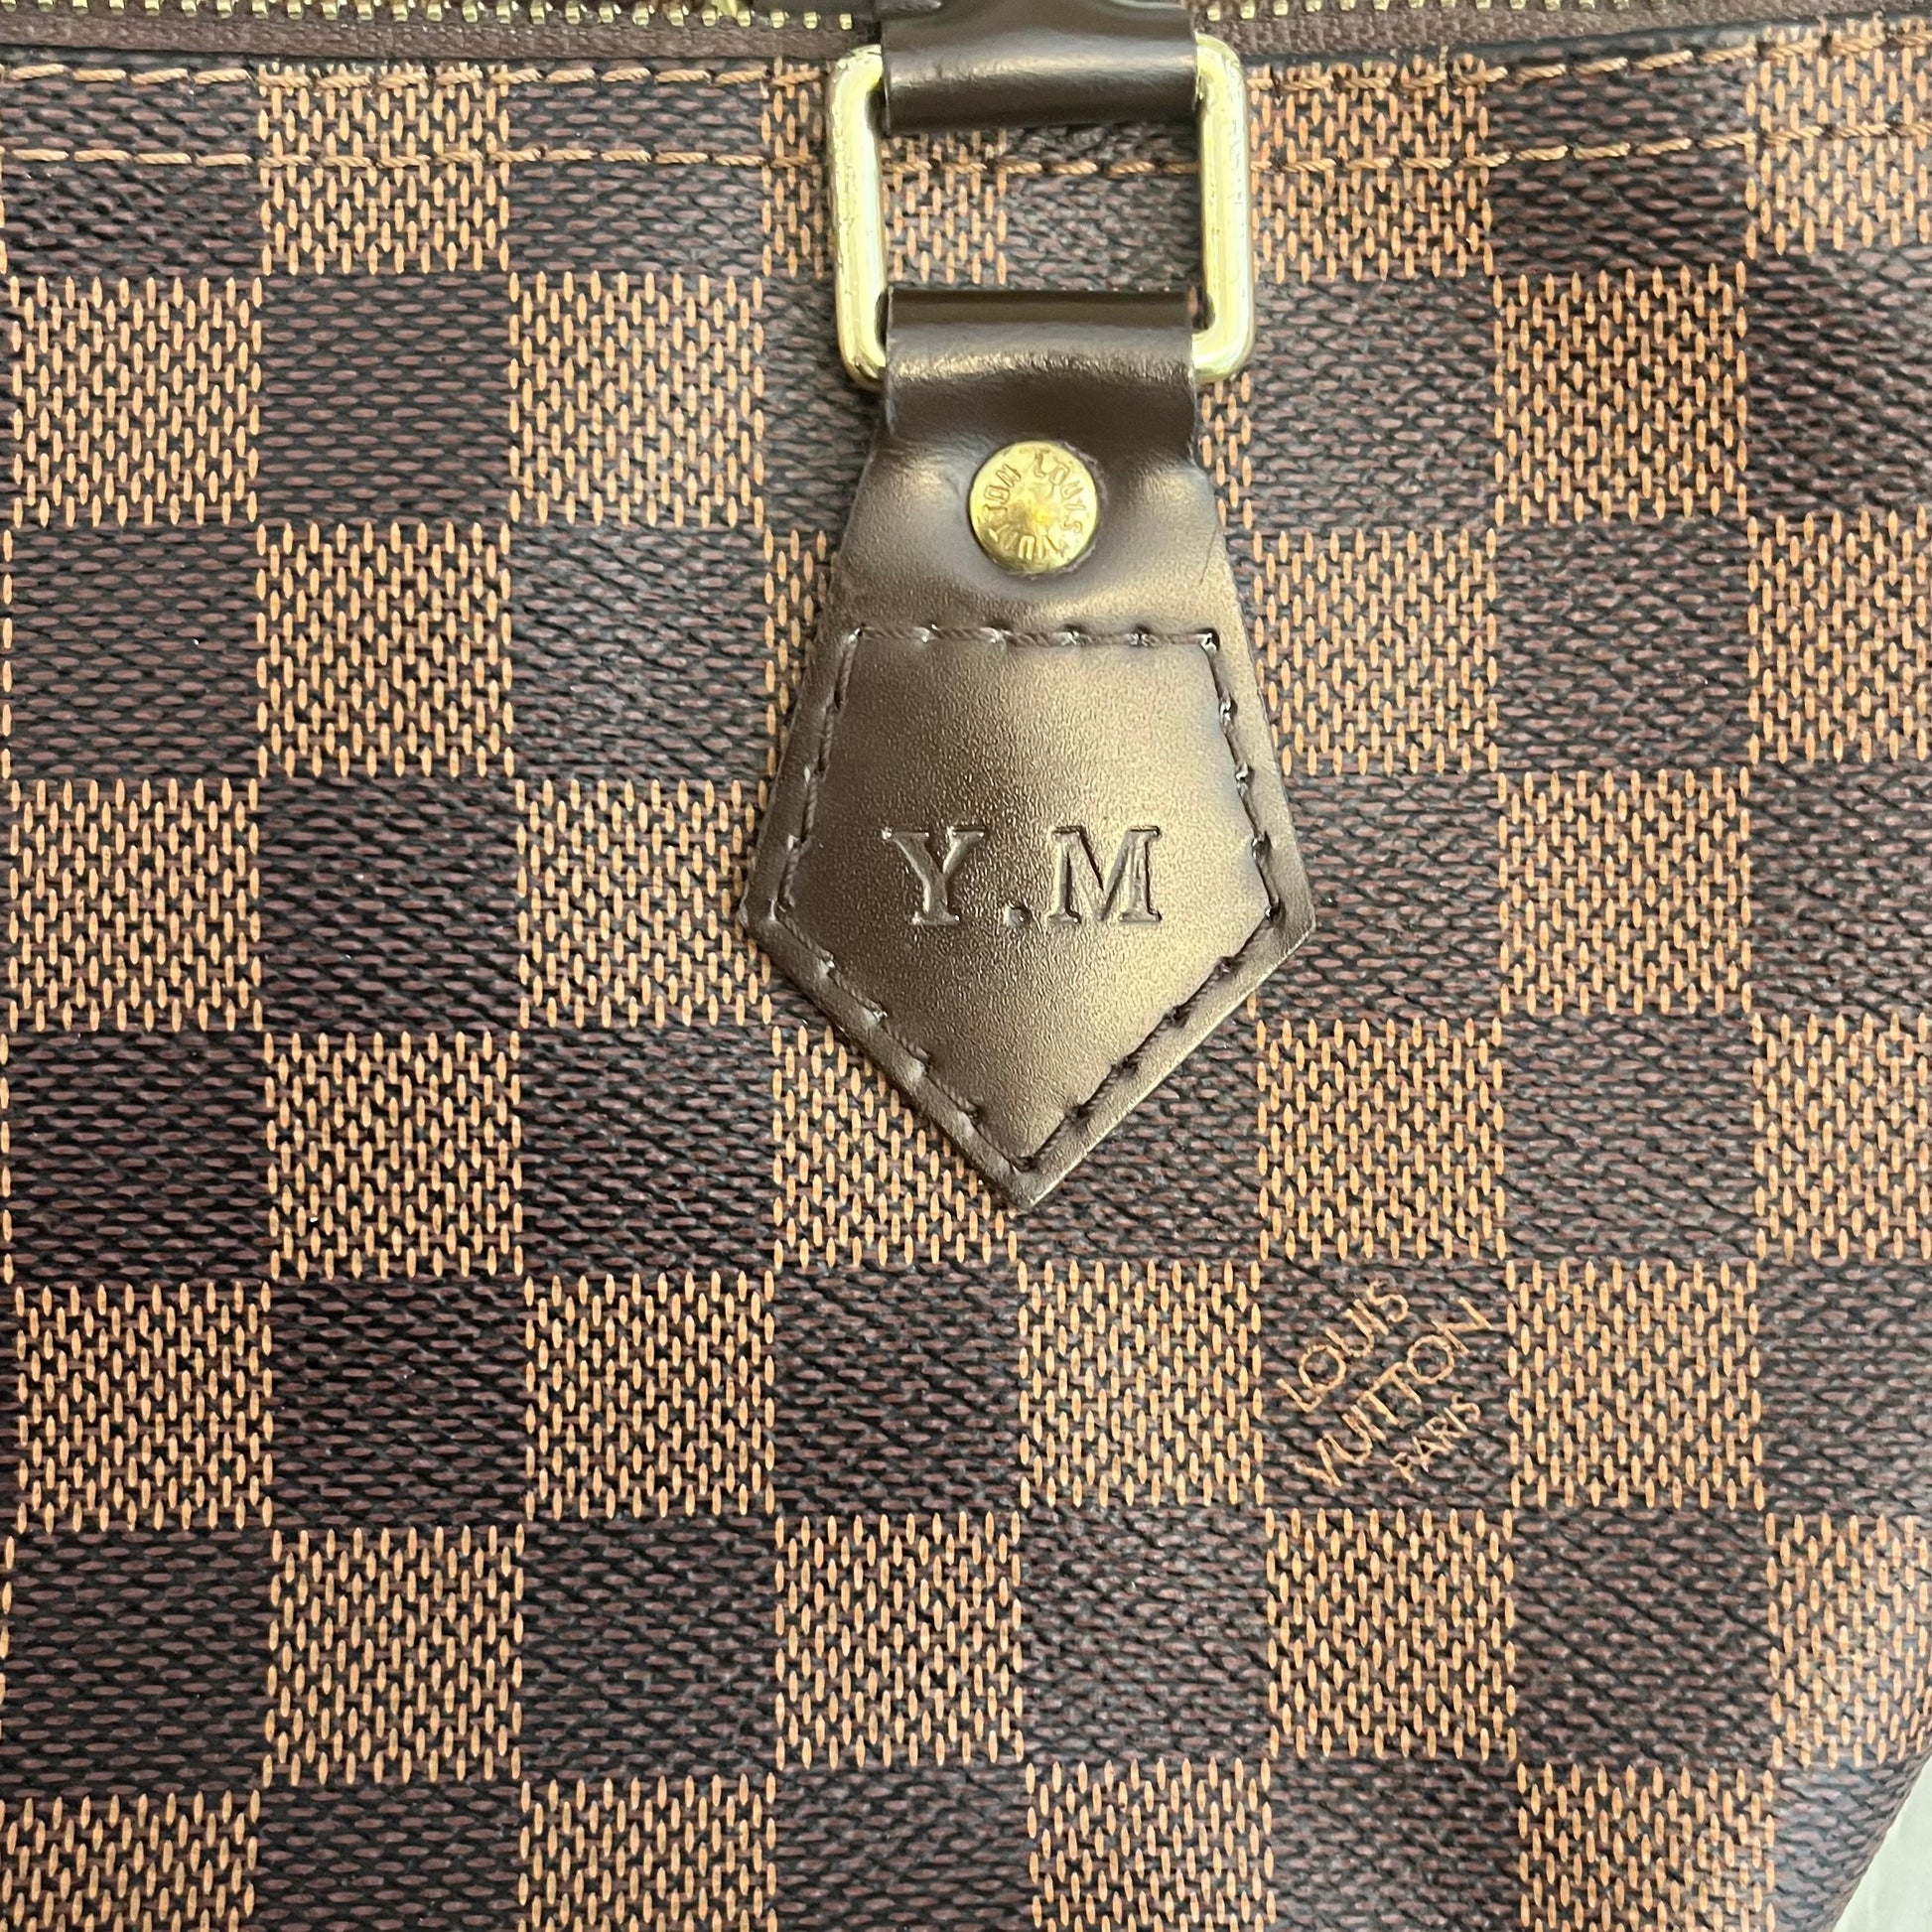 Hot stamped initials on my LV damier Bandouliere. Love!